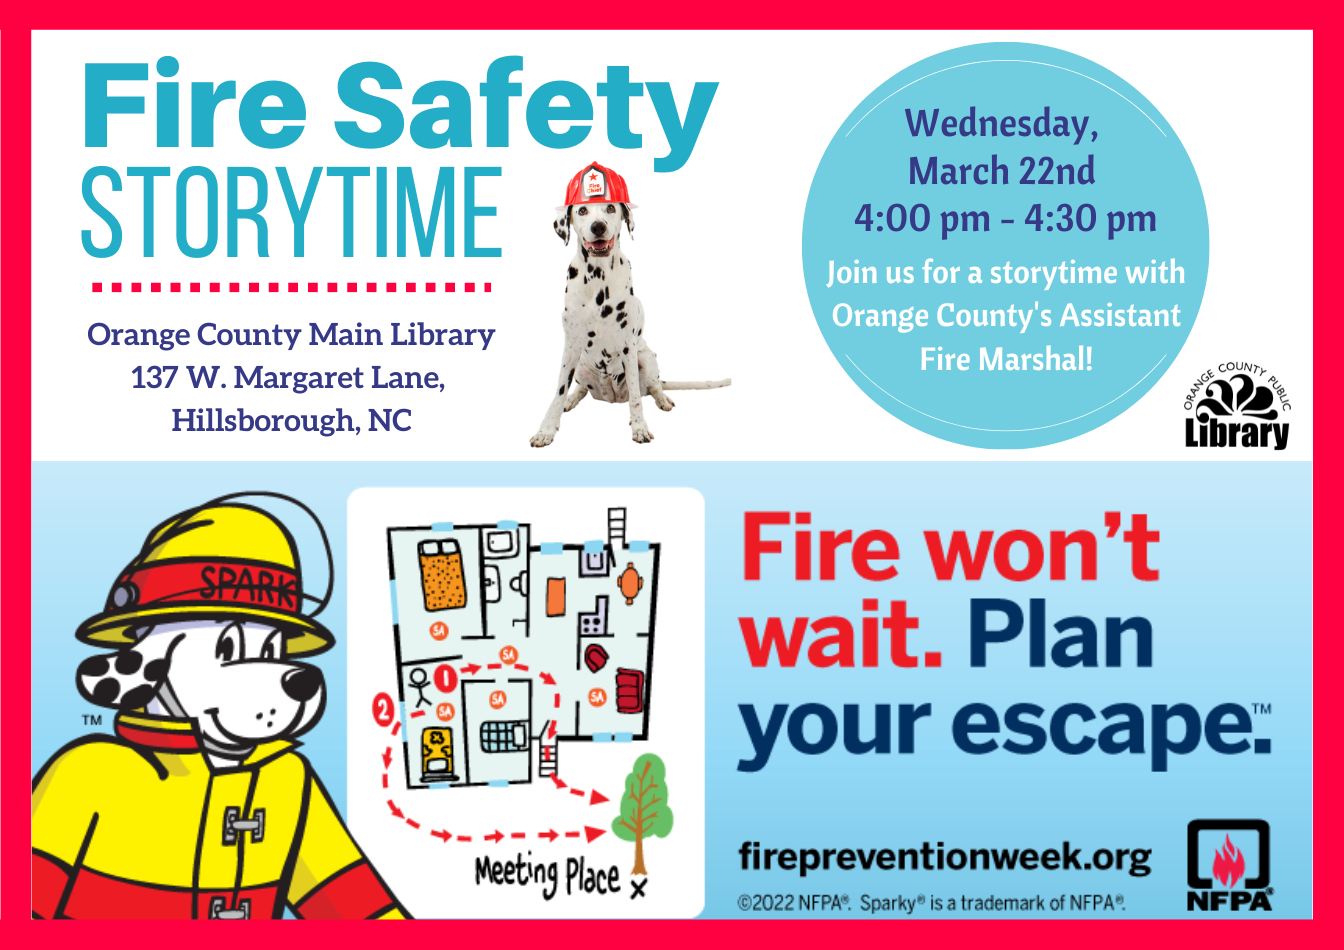 English Fire Safety storytime flyer